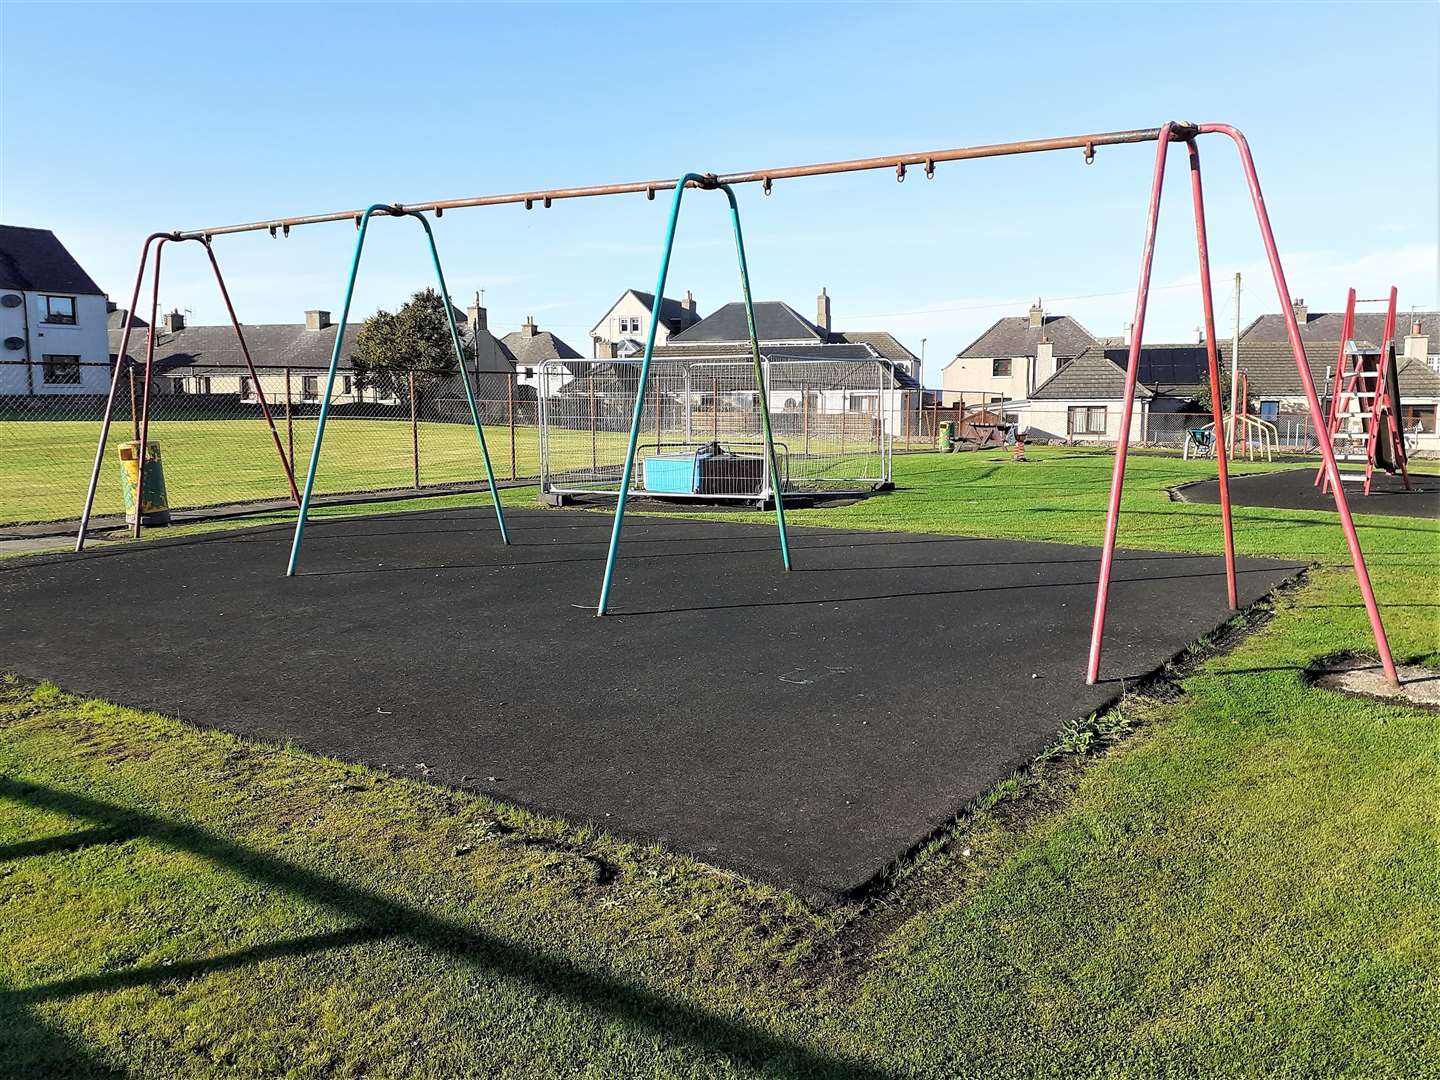 This Thurso play park has lost its swings.